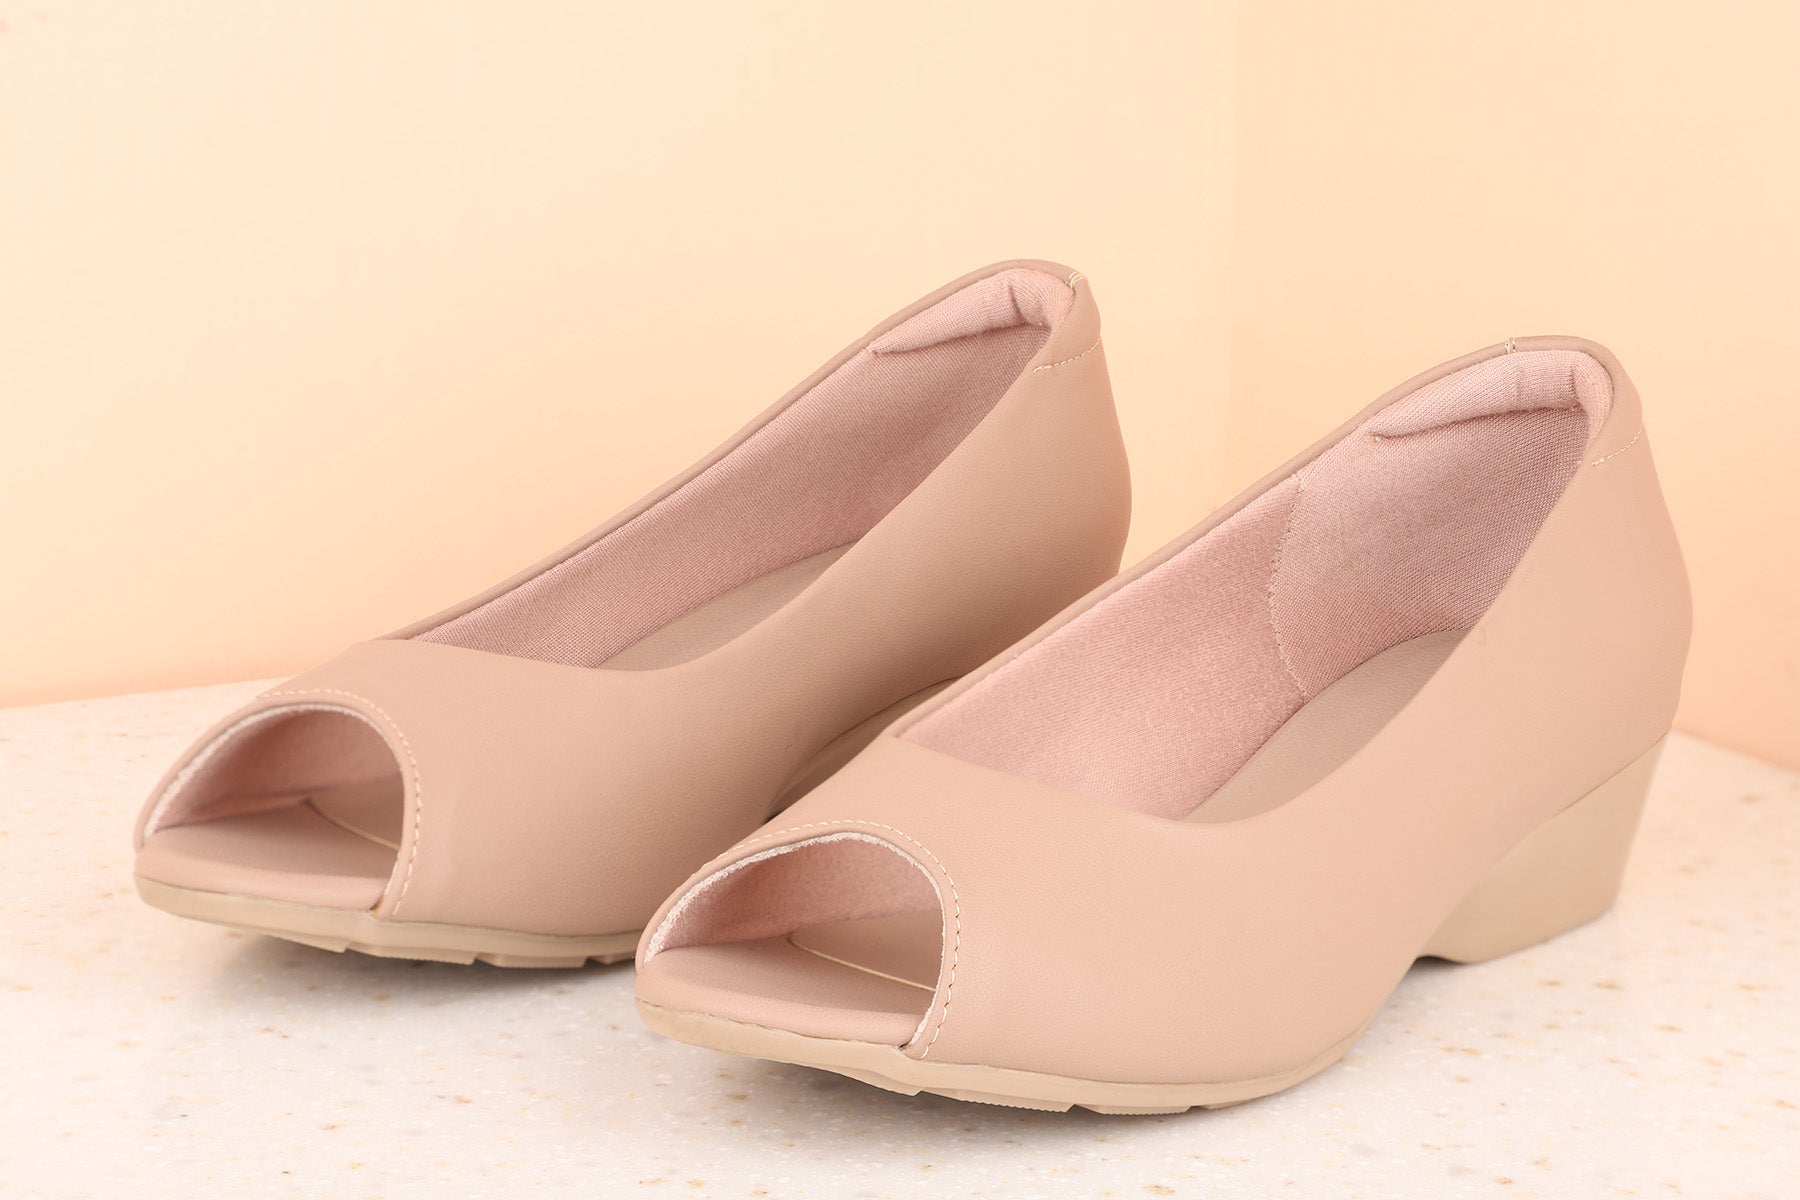 Wedges | Womens shoes wedges, Prom shoes, Wedge shoes